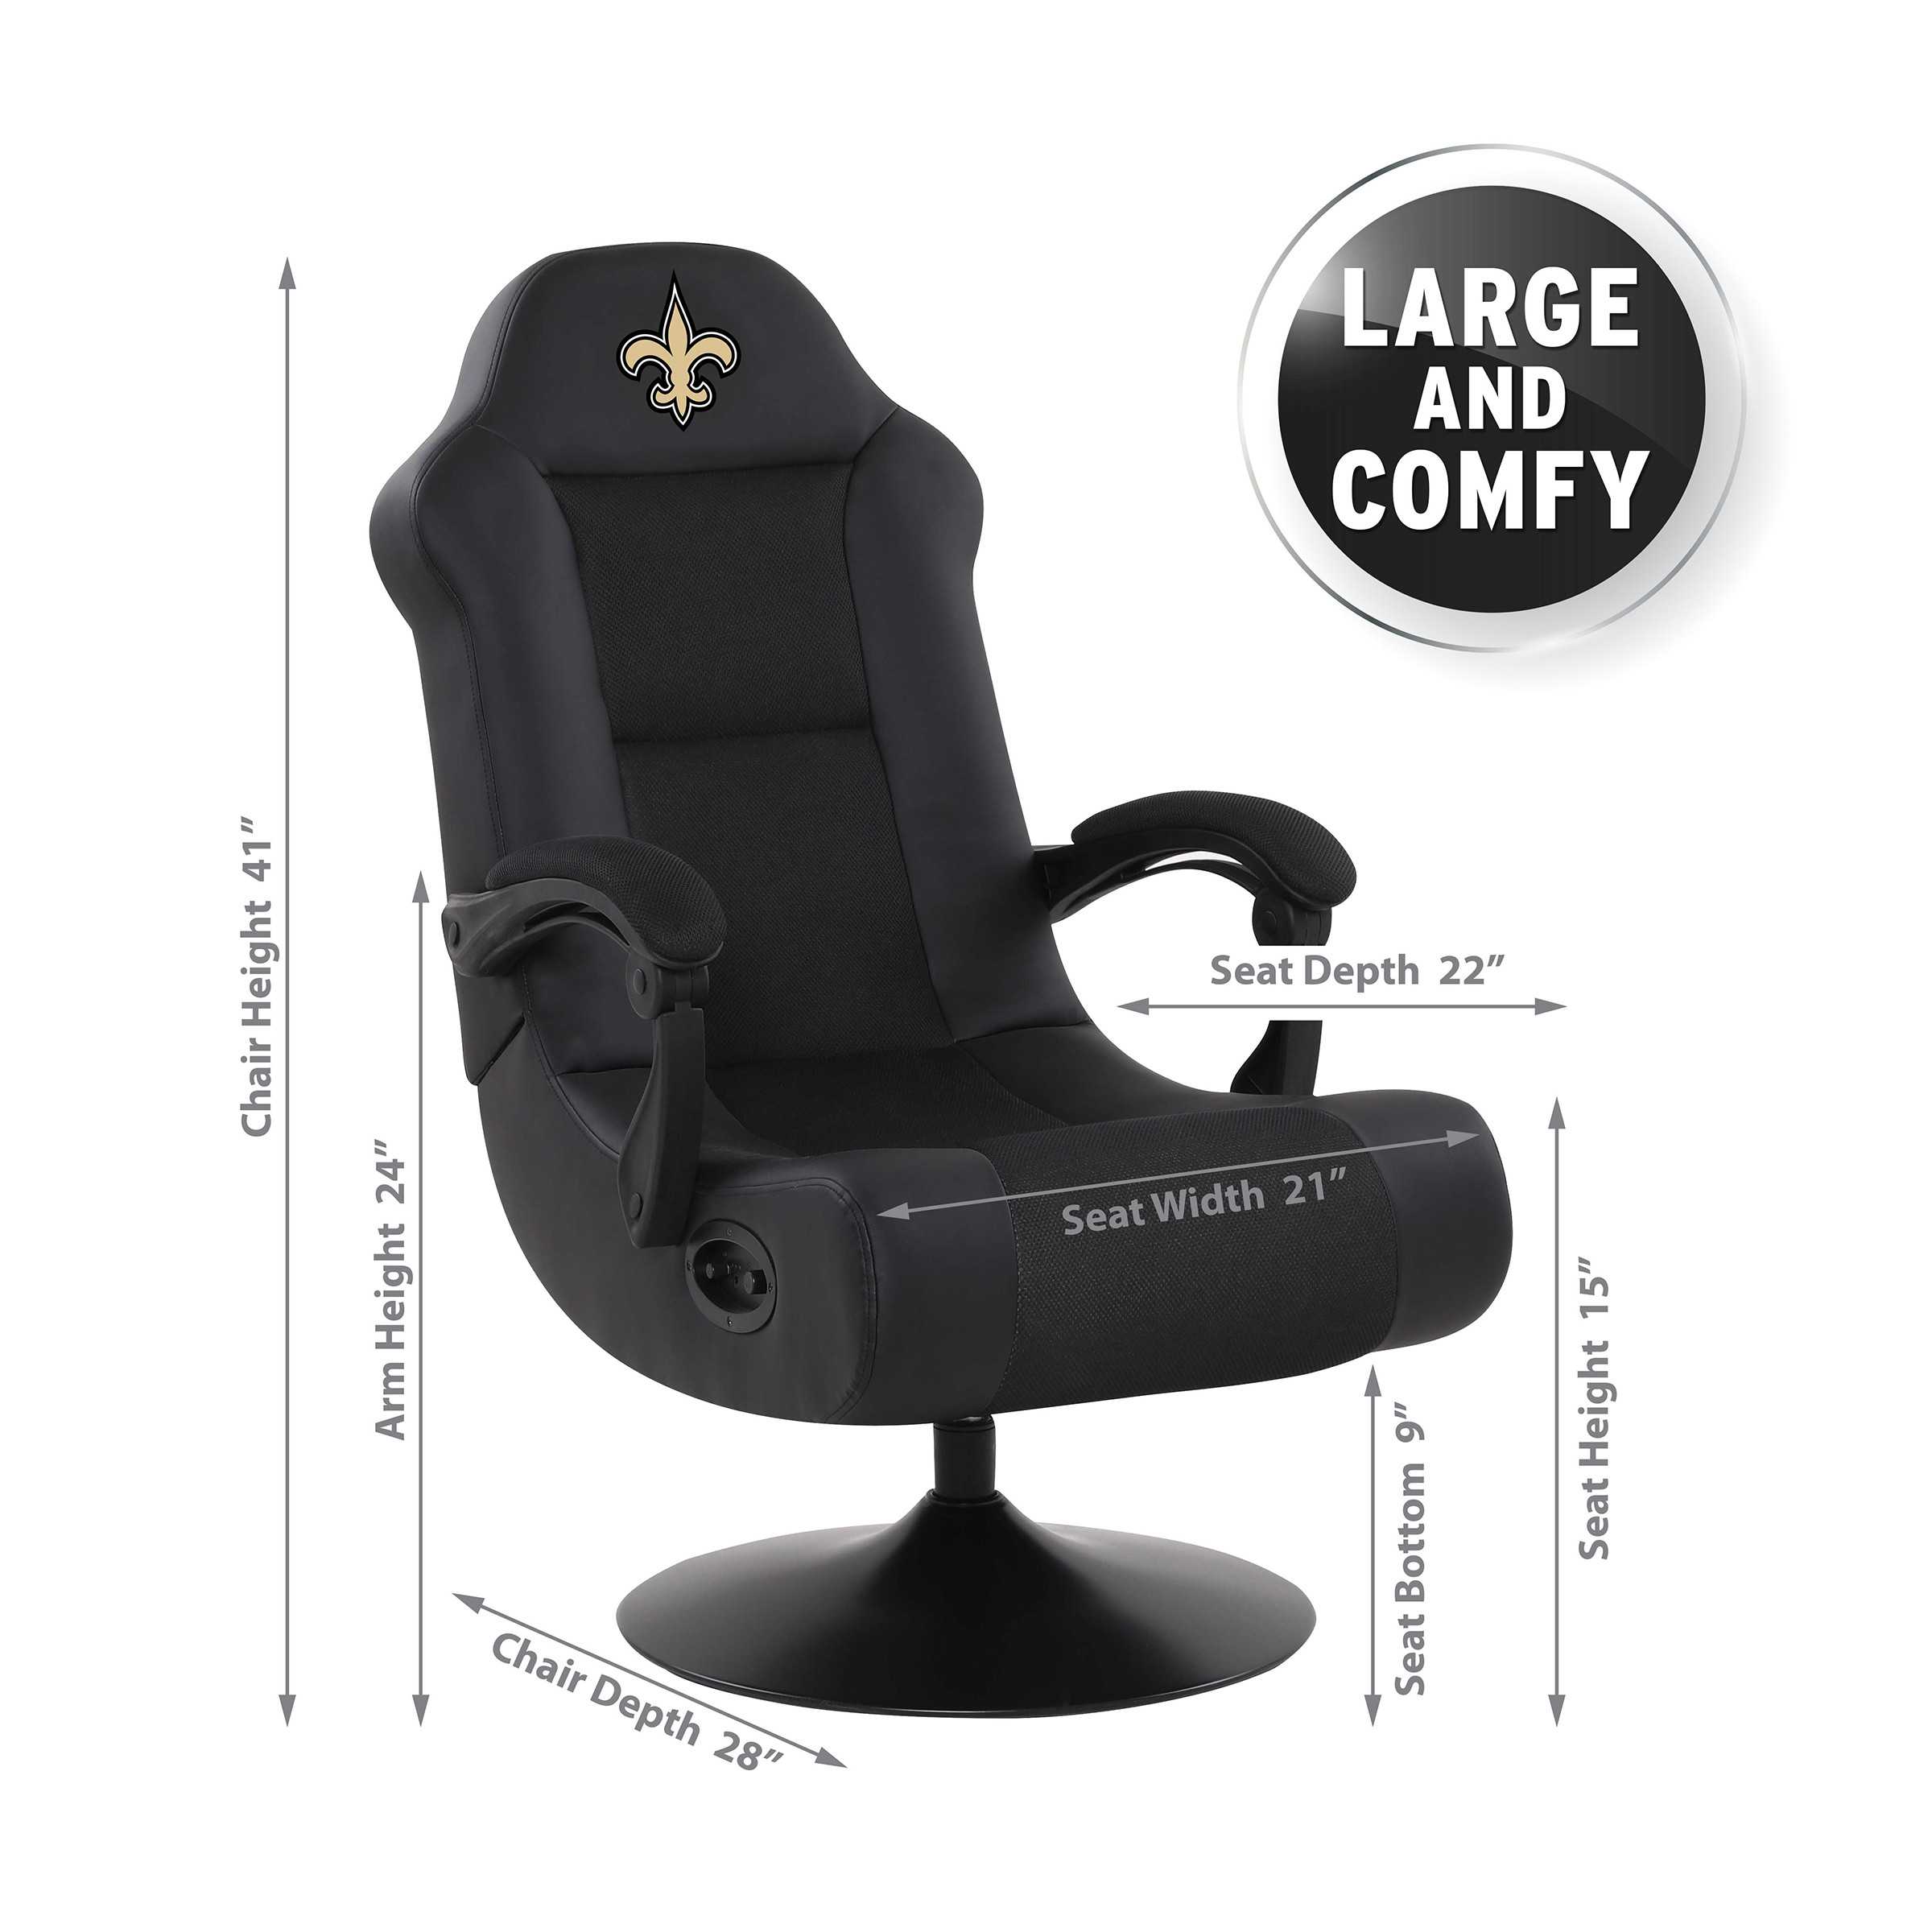 ULTRA GAME CHAIR NEW ORLEANS SAINTS